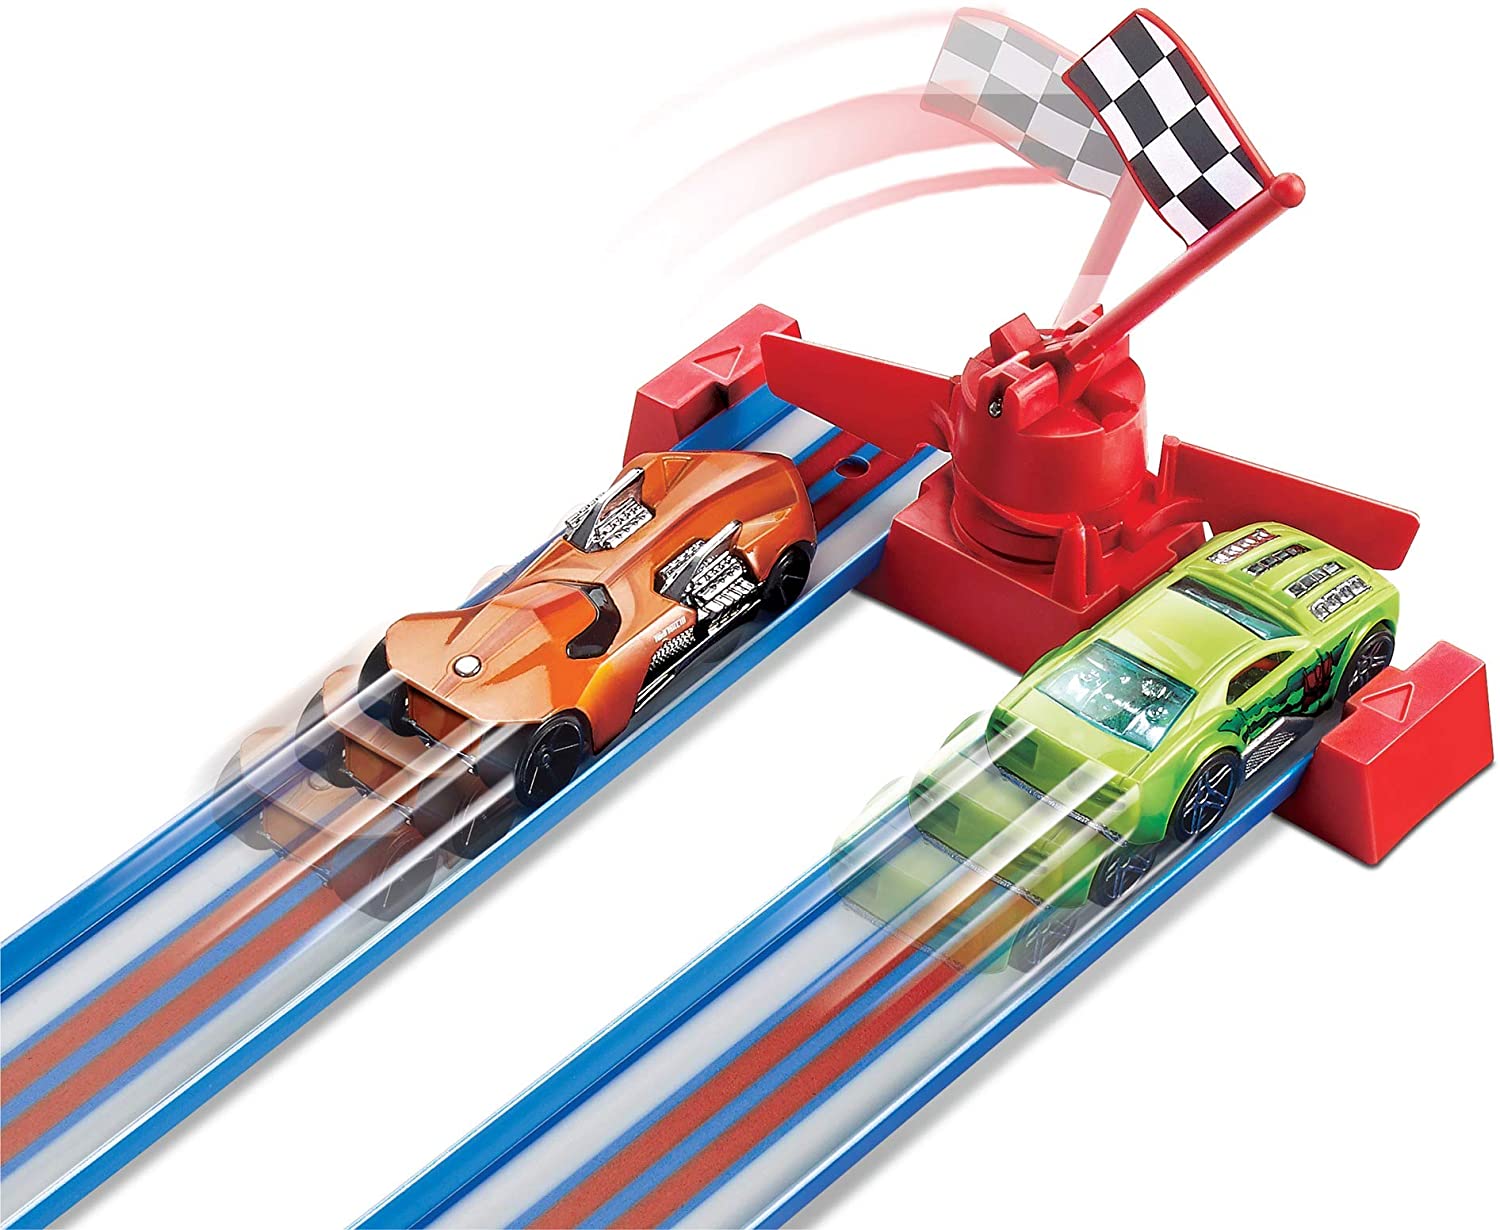 Hot Wheels Action Corkscrew Triple Loop Track Set with 1 Toy Car